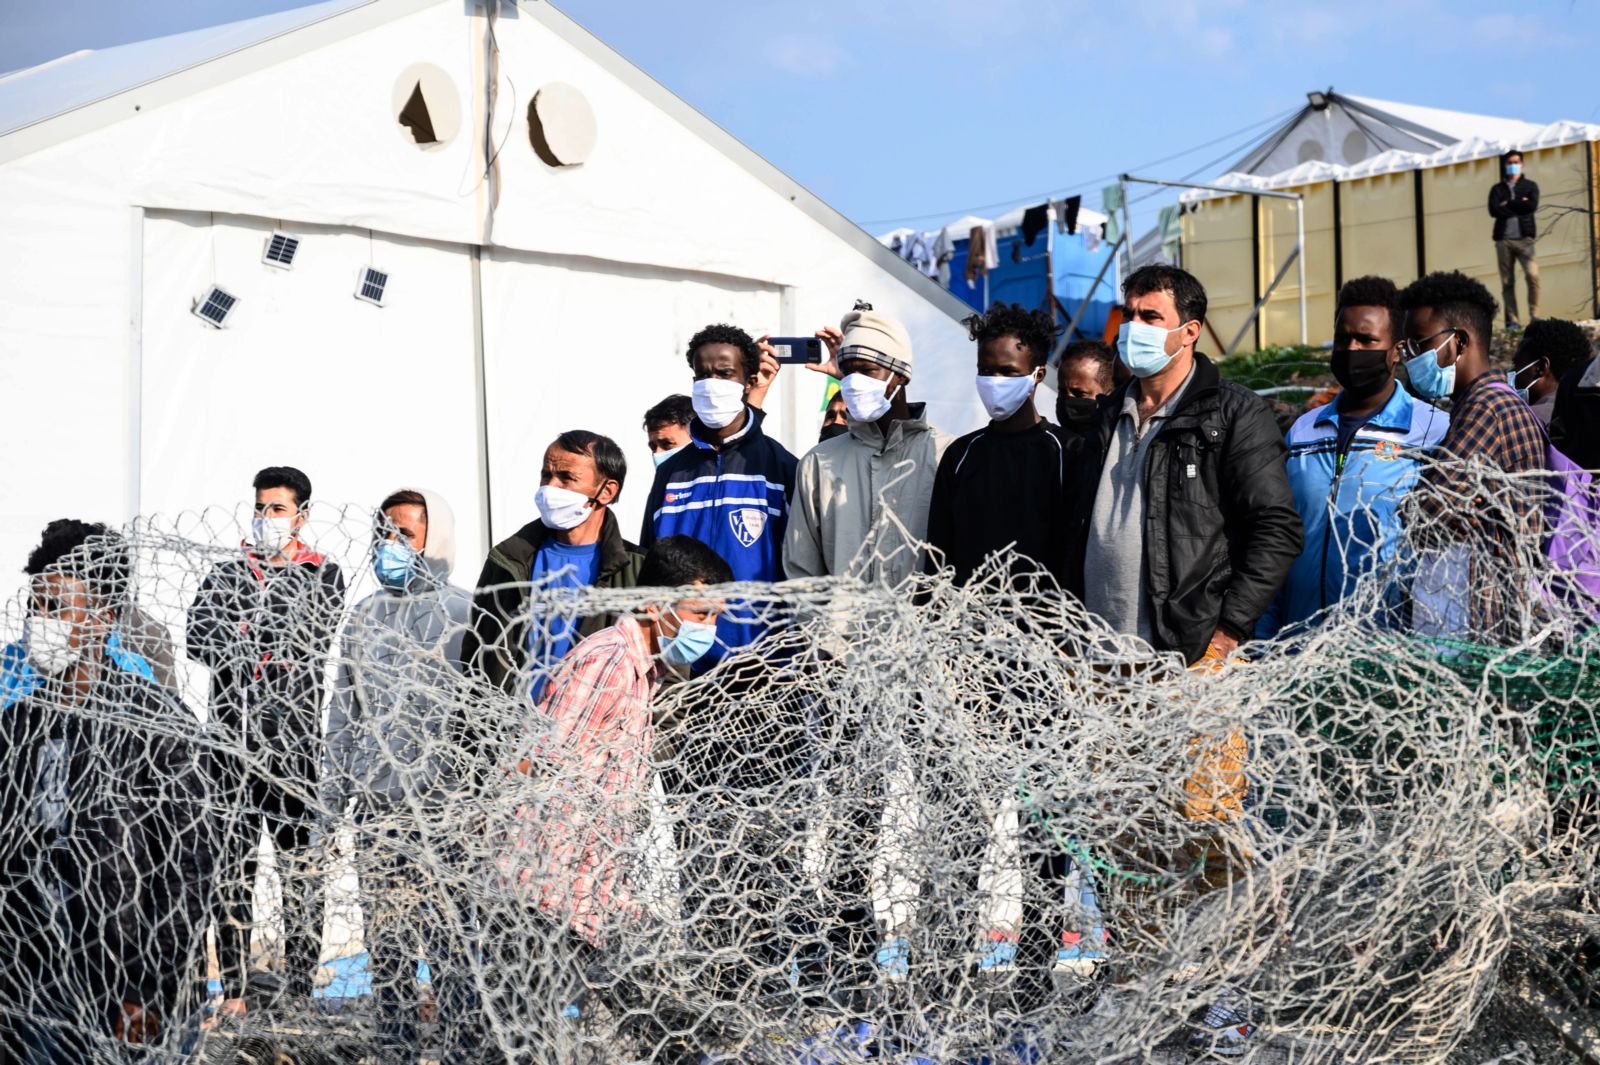 Why current events in Ukraine (should) raise questions about refugees in Greece